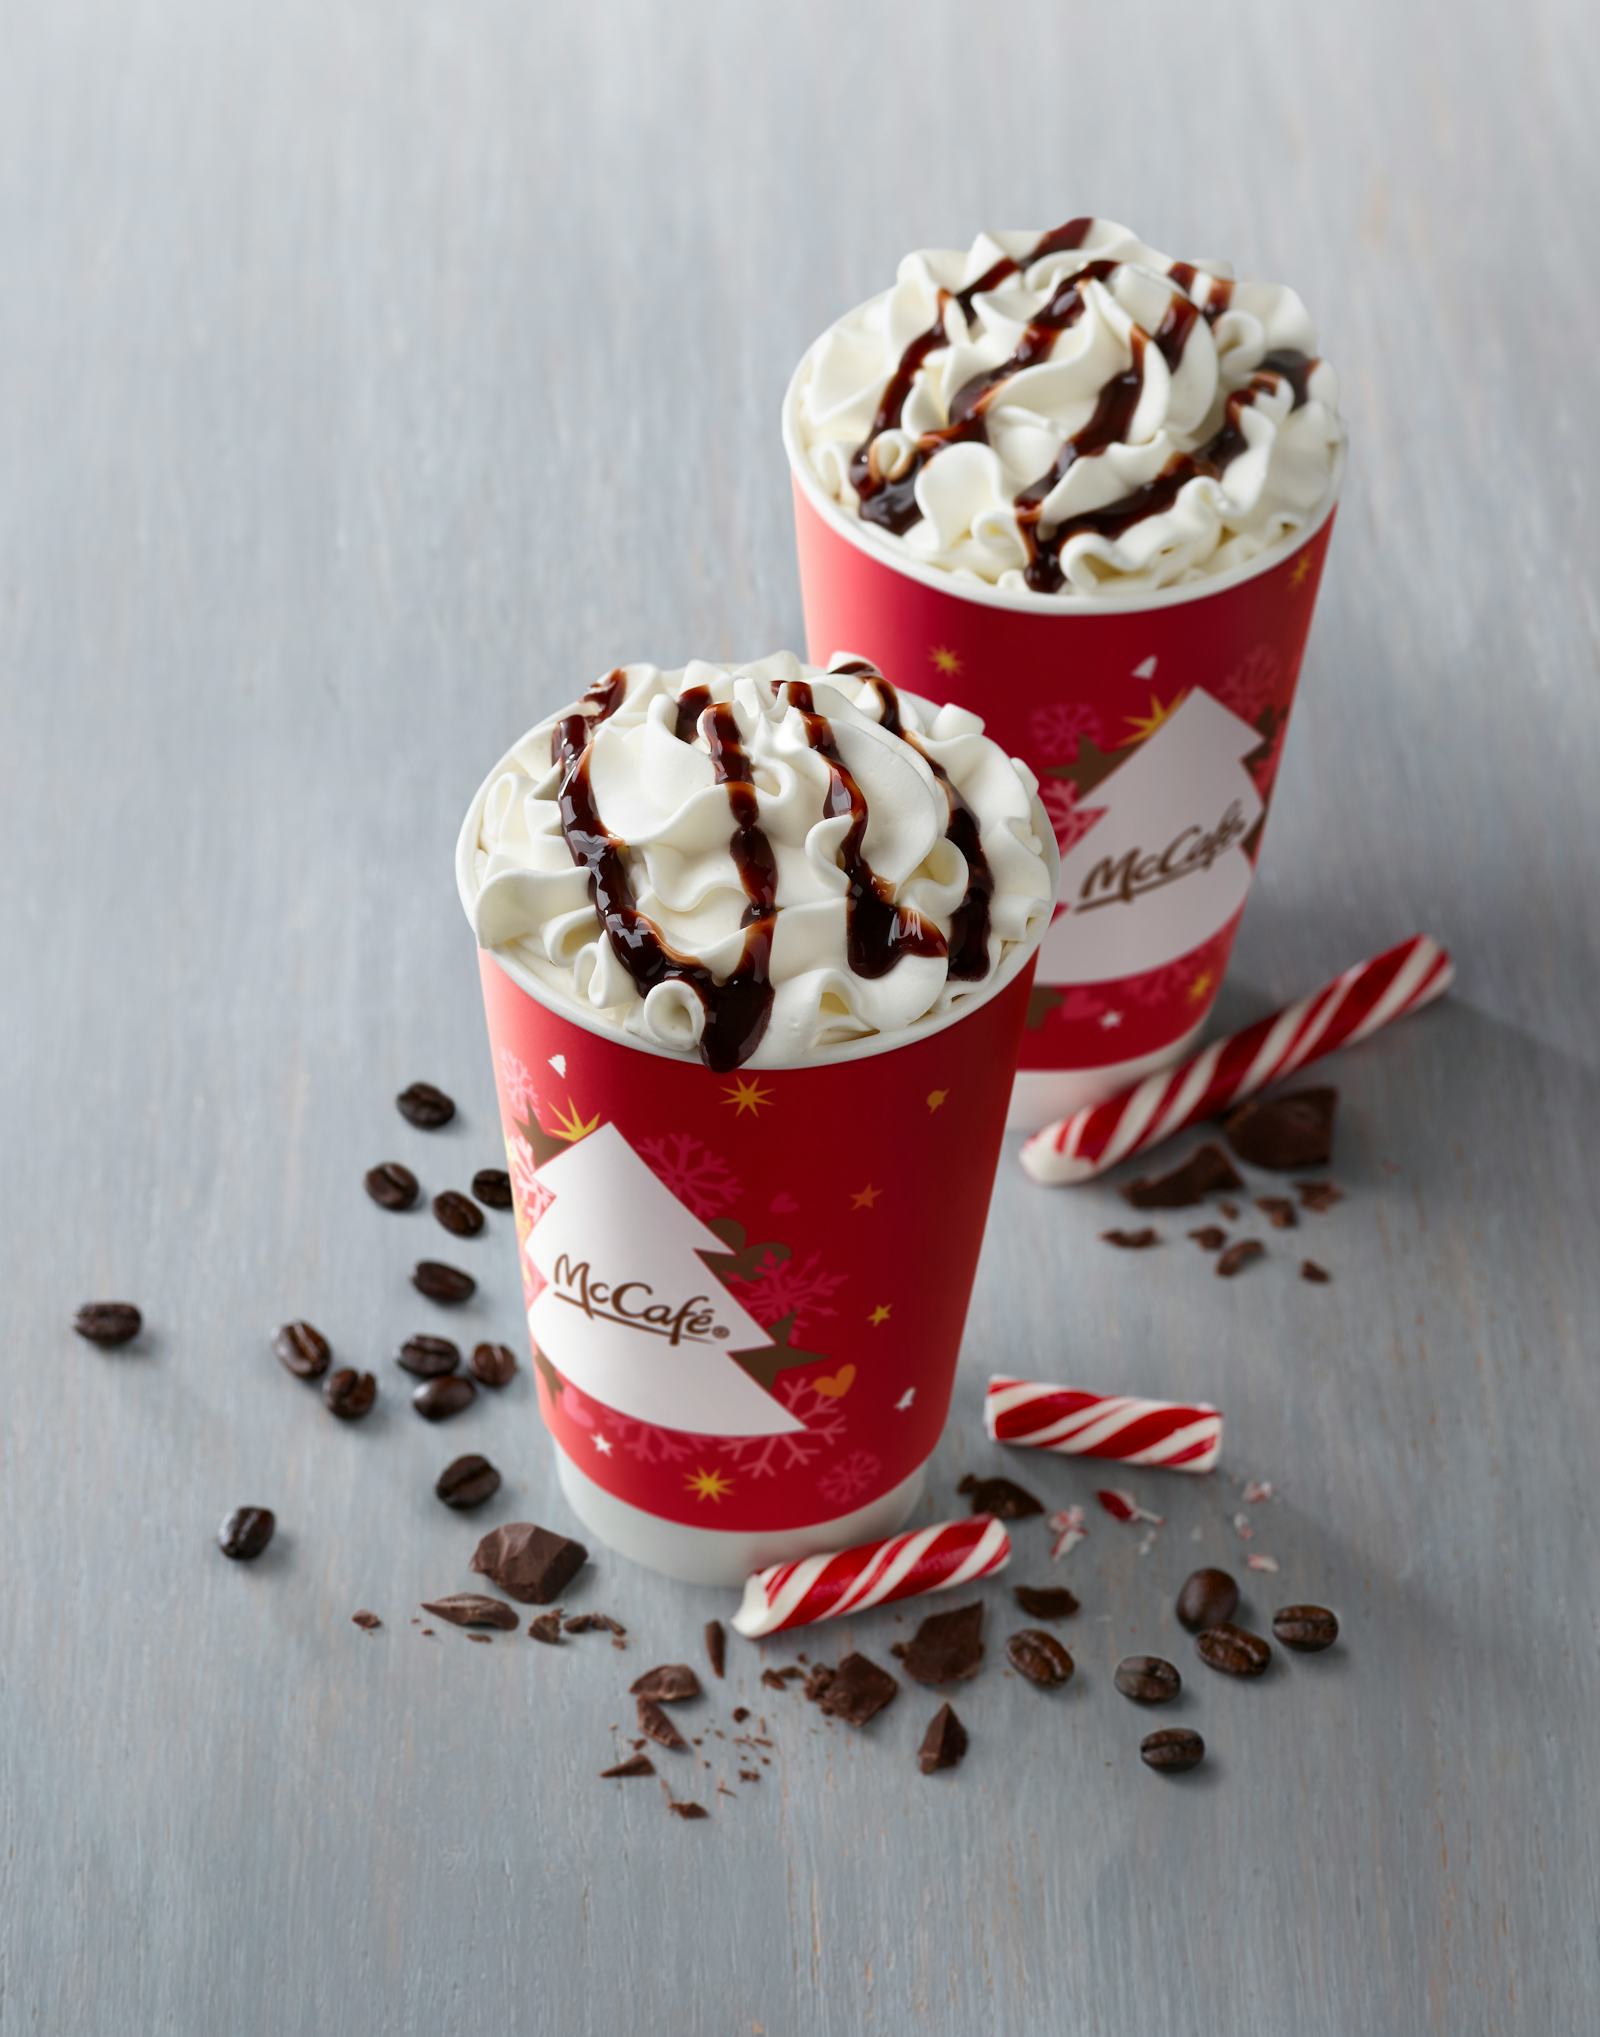 How Much Does A McDonald's McCafe Peppermint Mocha Cost? It's An